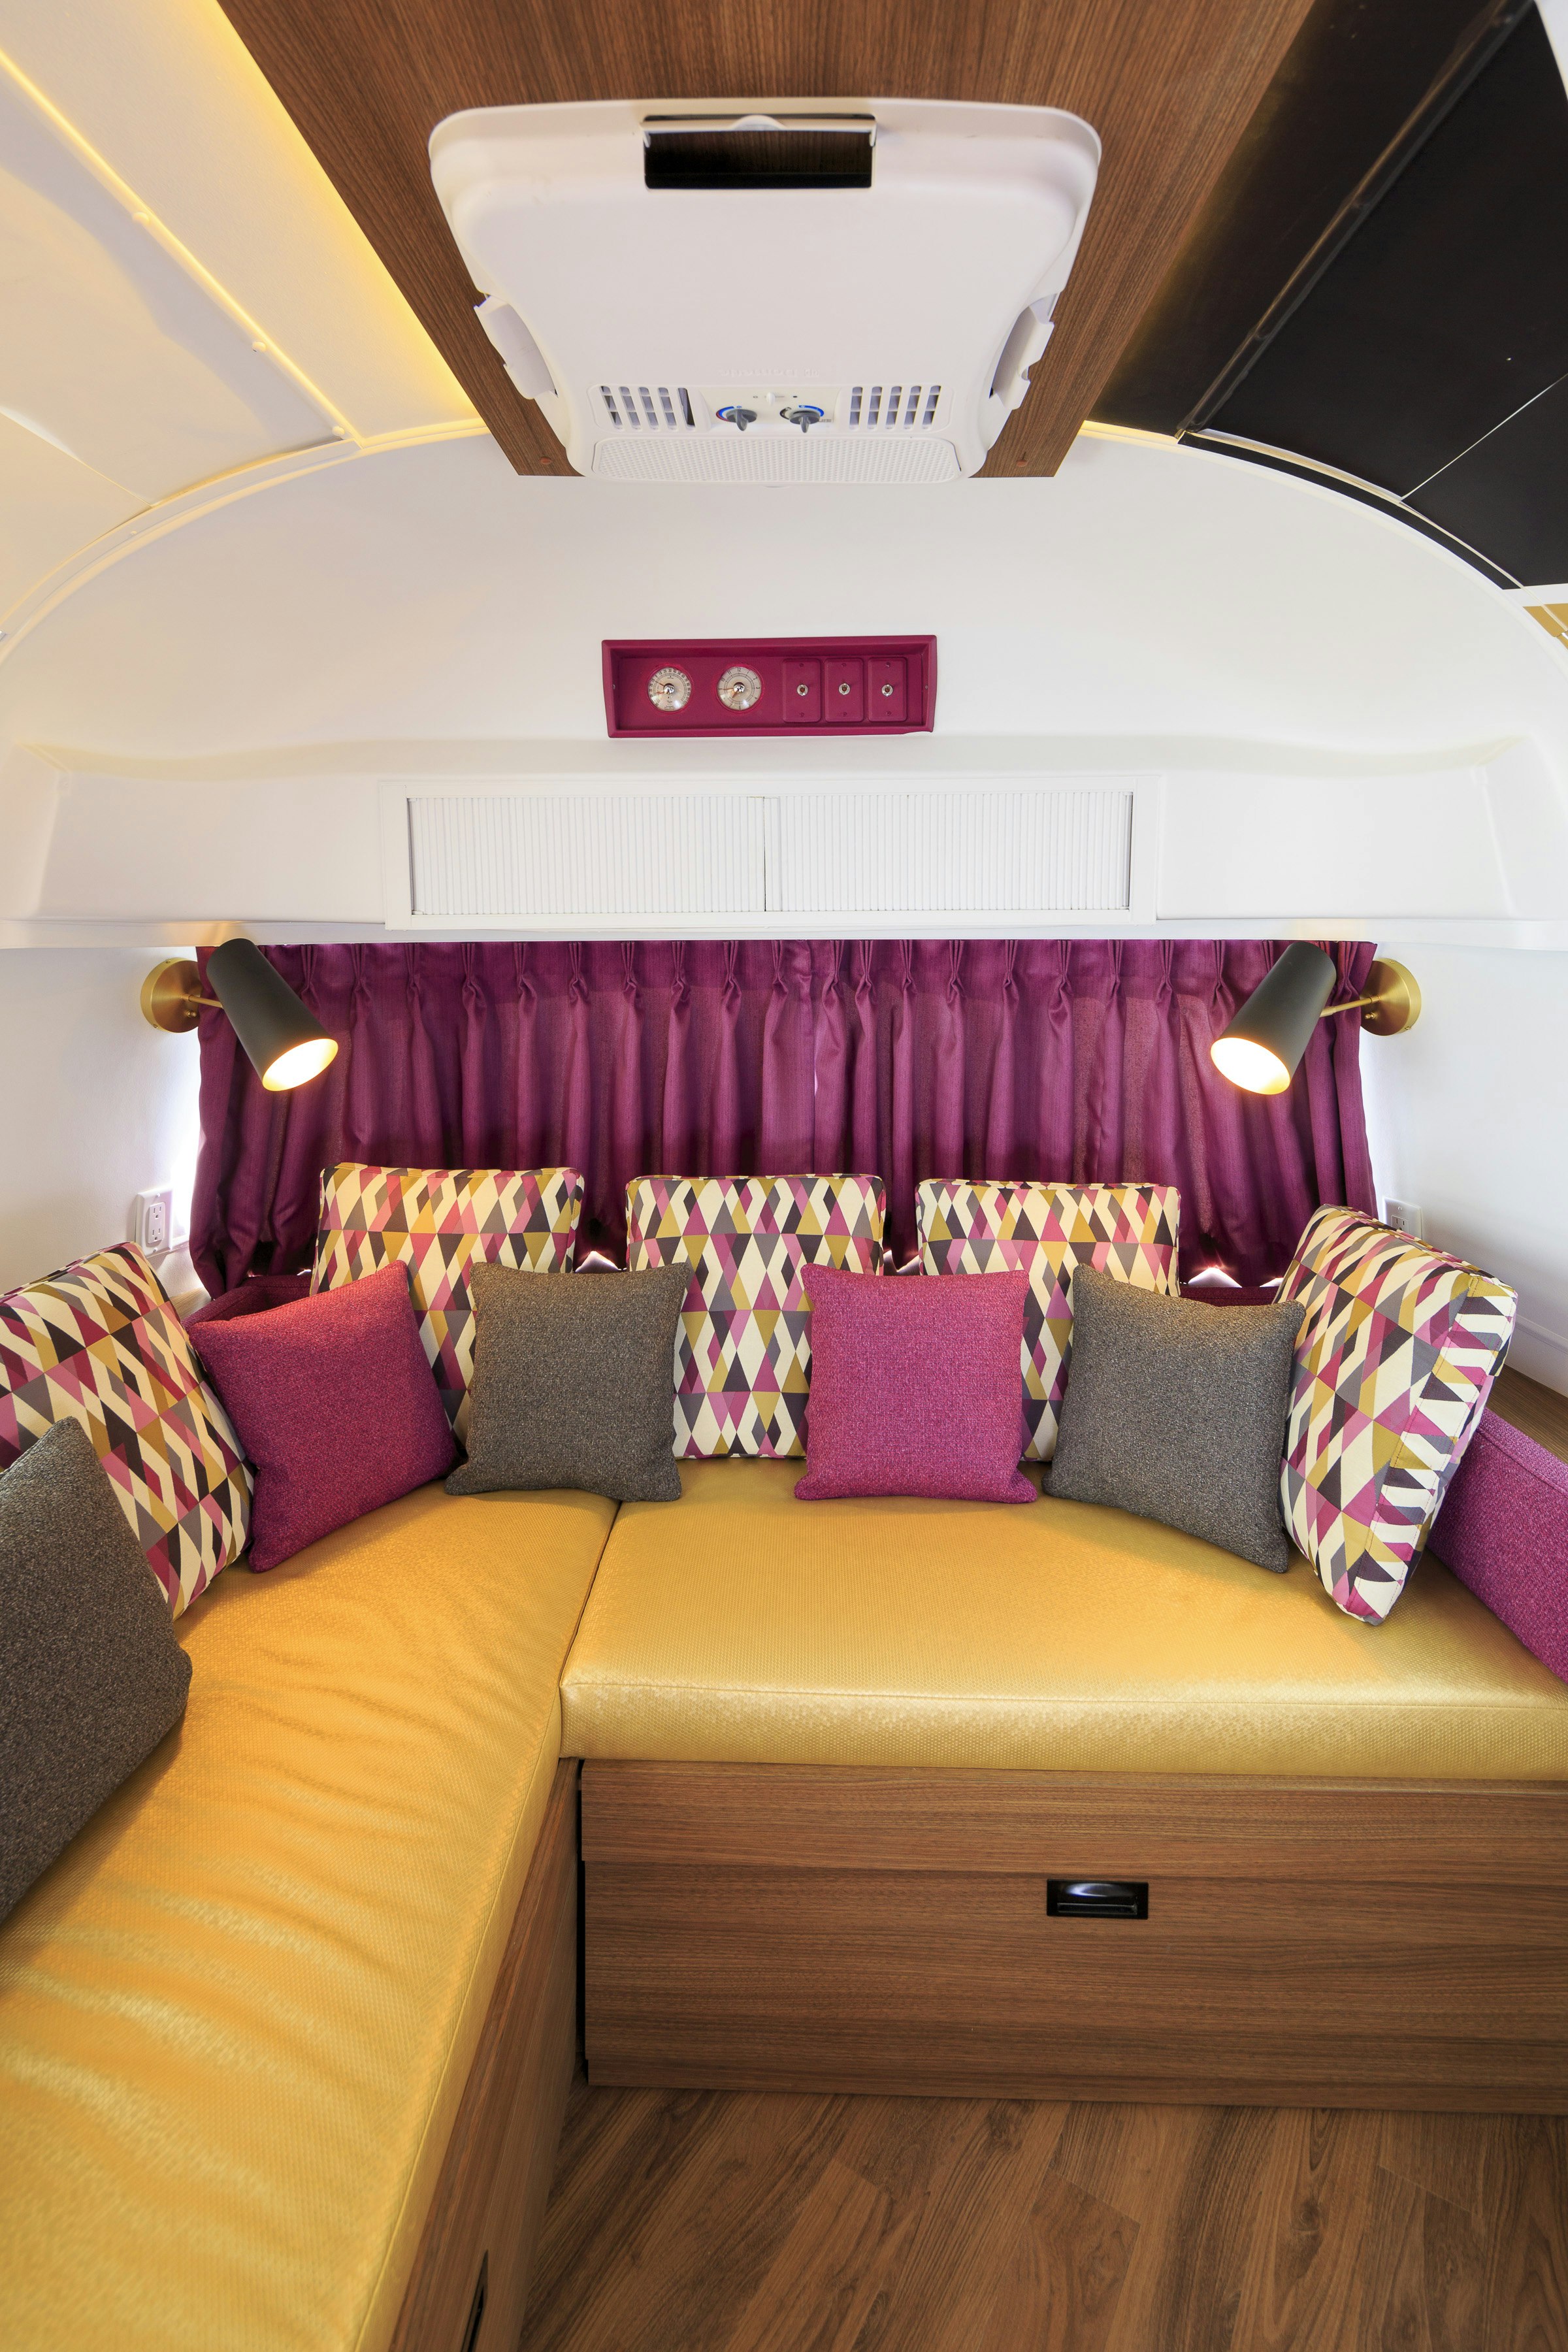 The colorful interior of the "Zedstream" Airstream trailer at Hotel Zed in British Columbia is decorated with warm wood, yellow vinyl seats, and magenta curtains that coordinate with pillows upholstered in pink, green, purple, and white harlequin patterns. 